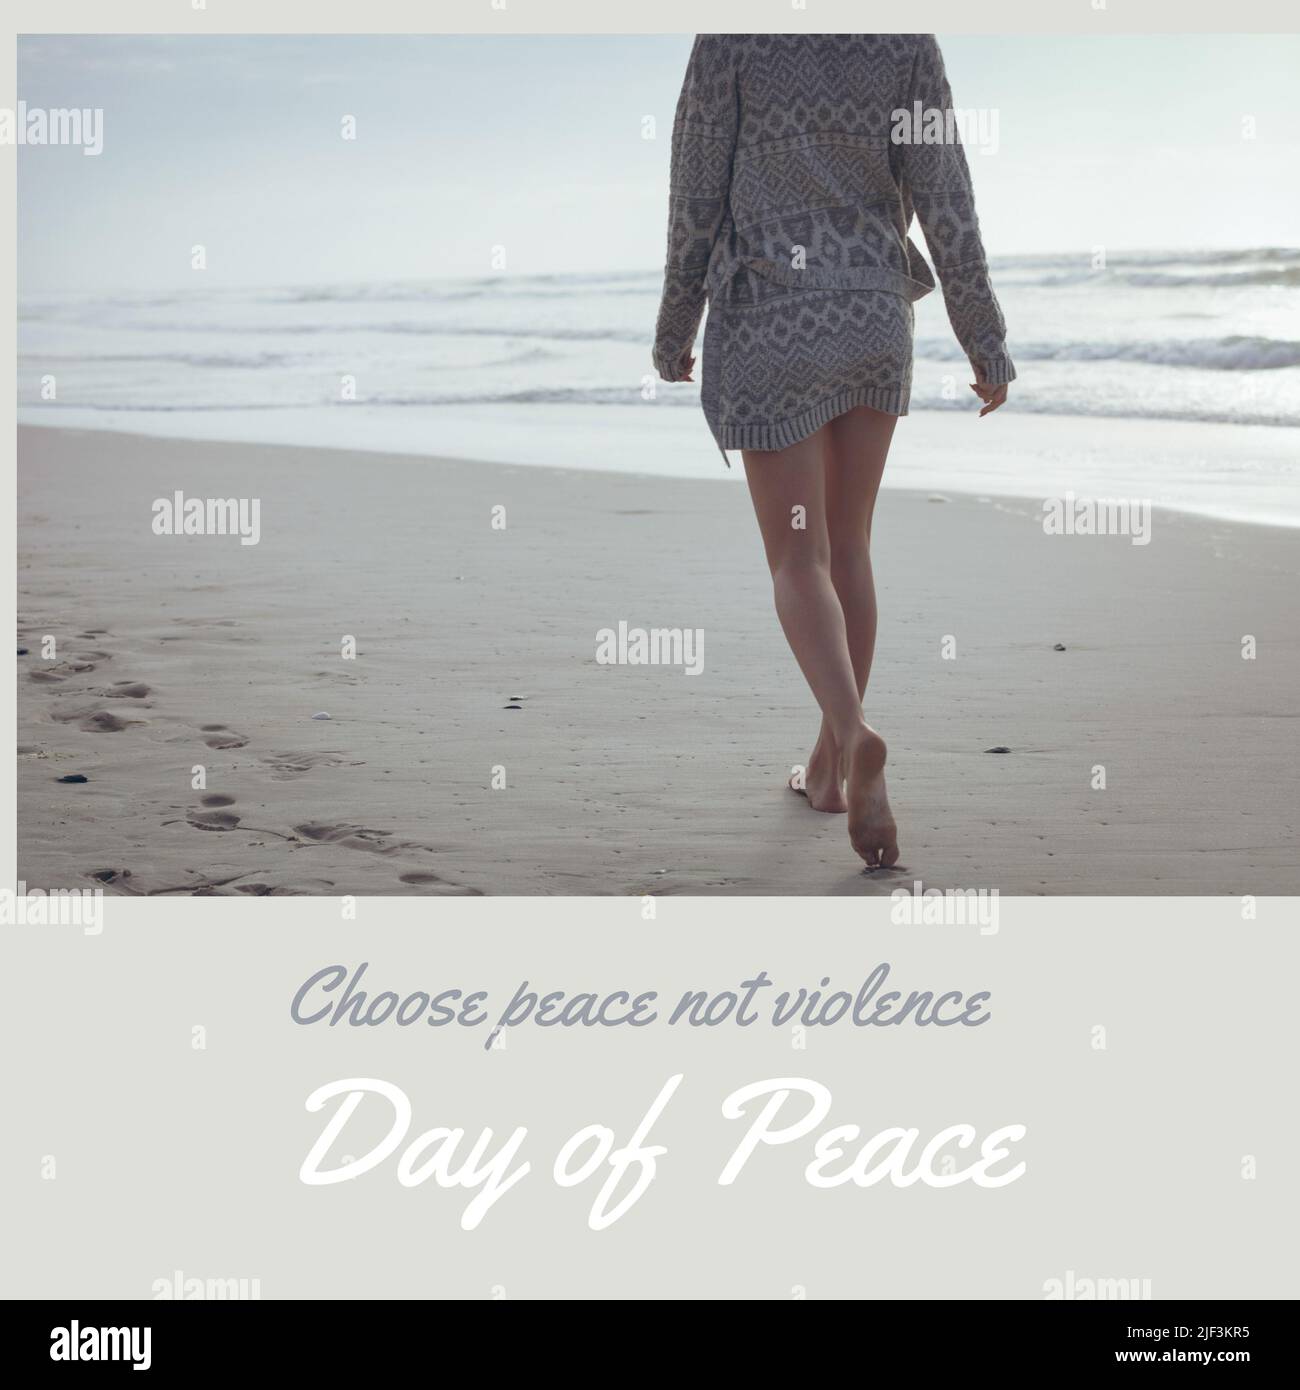 Digital composite image of caucasian young woman walking at beach, day of peace text Stock Photo